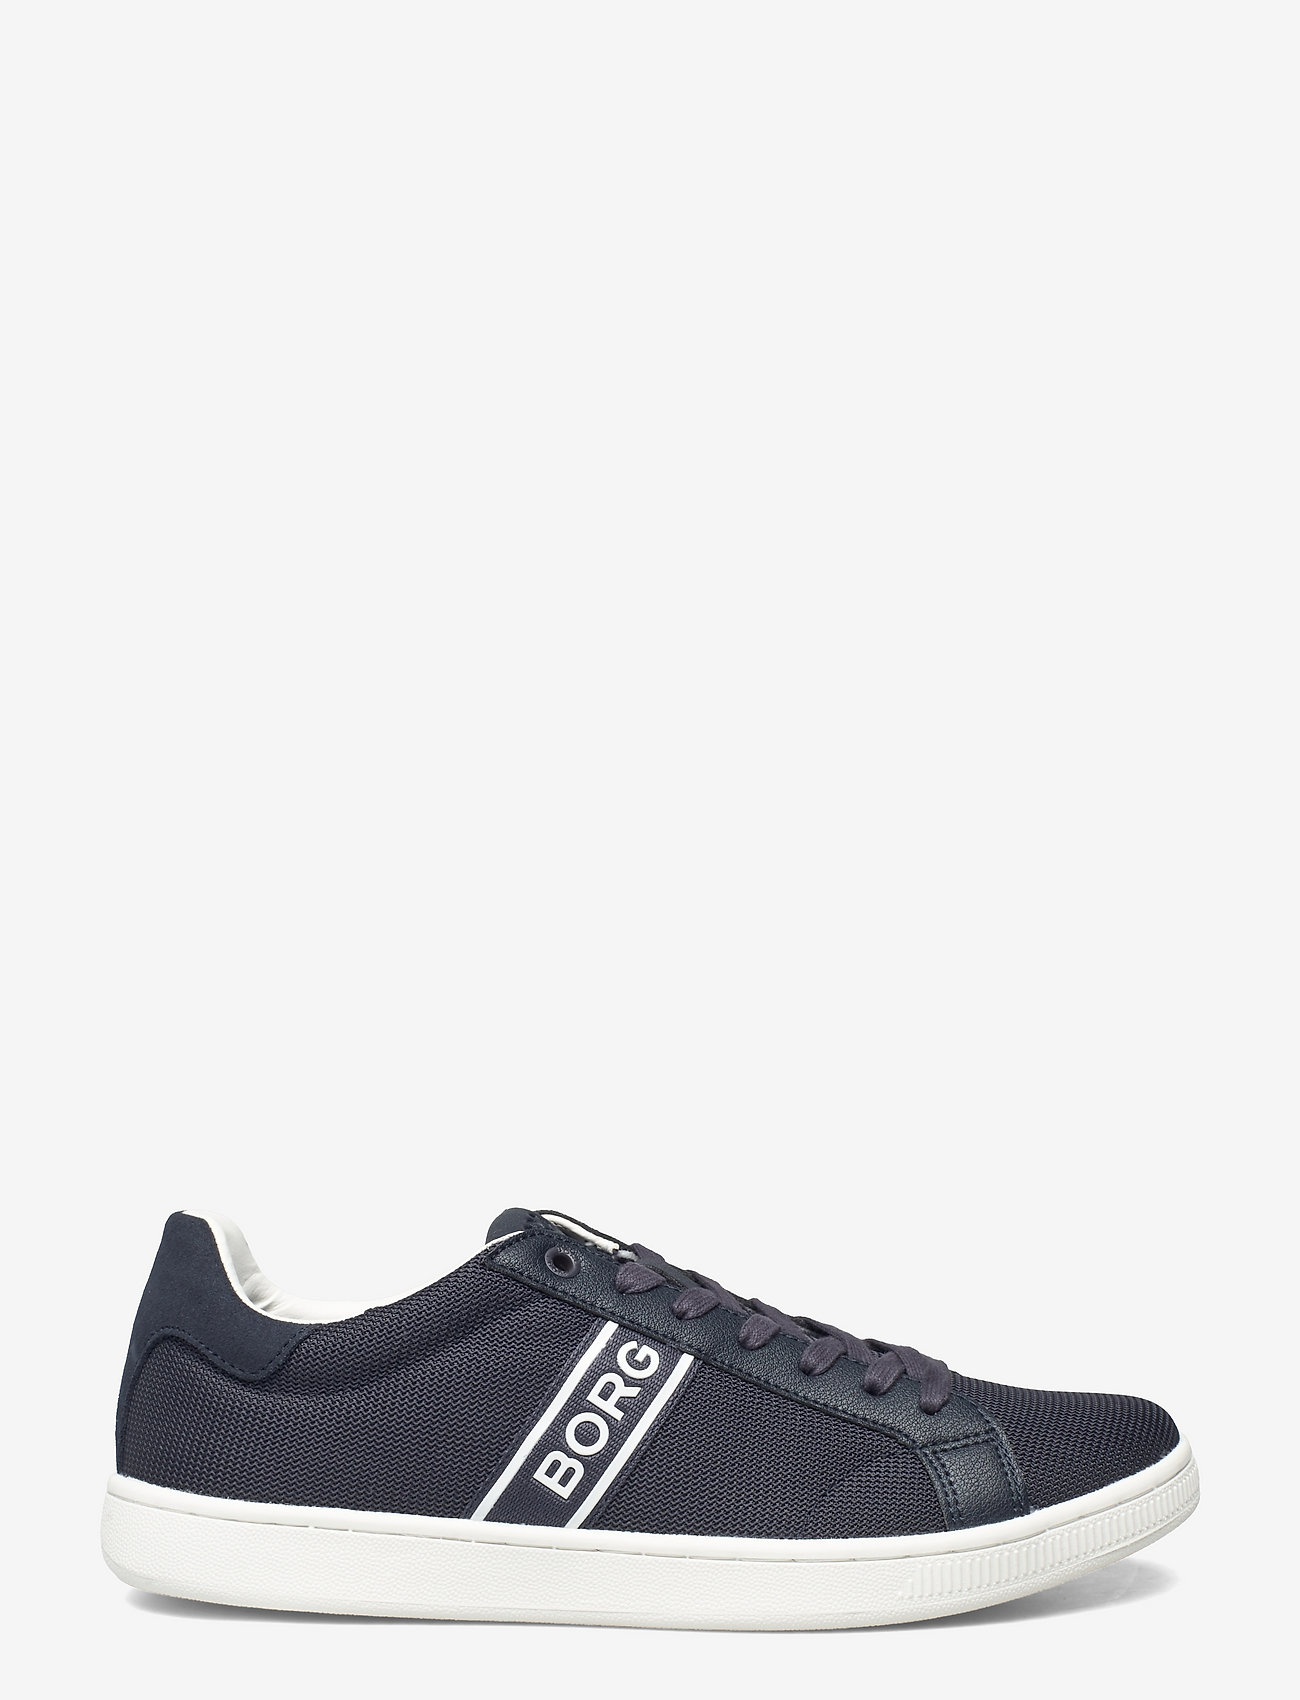 Björn Borg - T317 MSH M - laag sneakers - nvy - 1